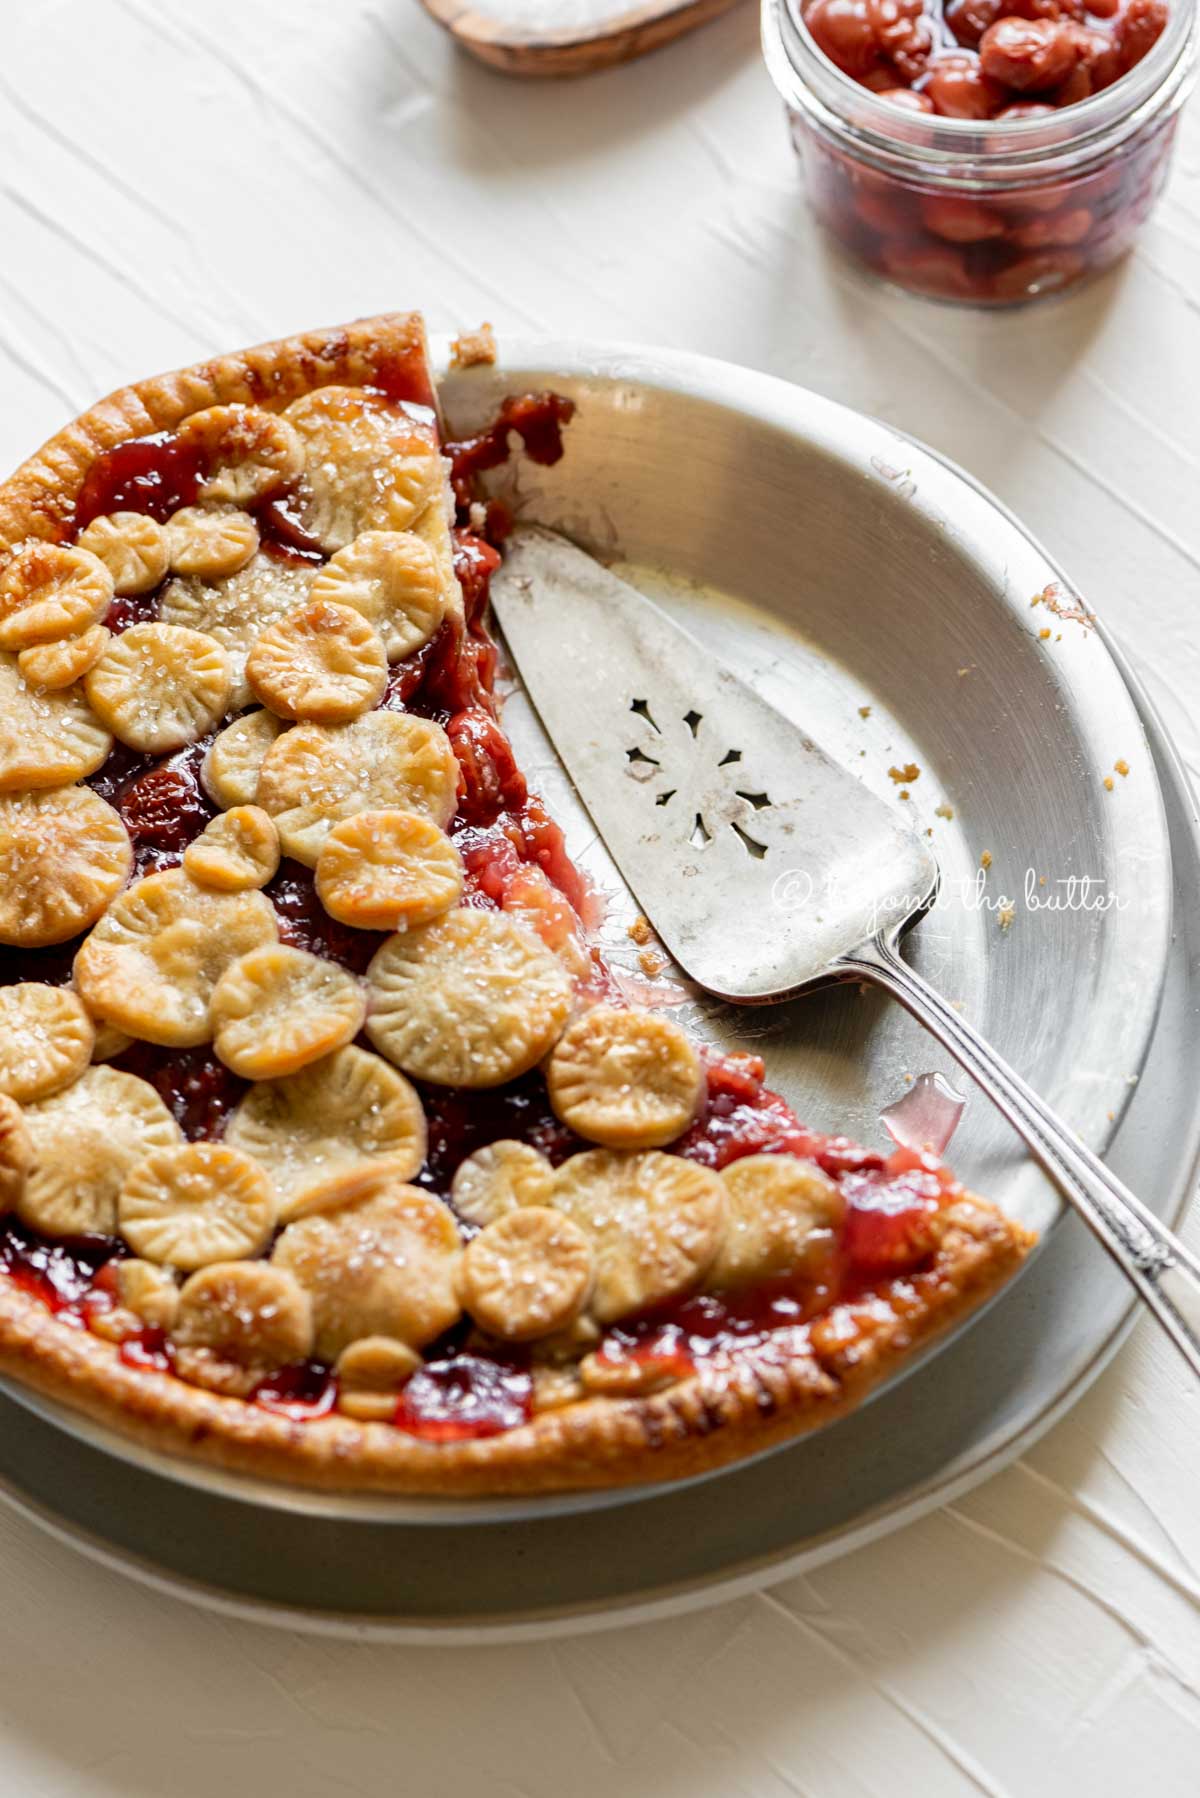 Angled image of half eaten cherry pie with pie server placed on the pie plate | | All Images © Beyond the Butter™